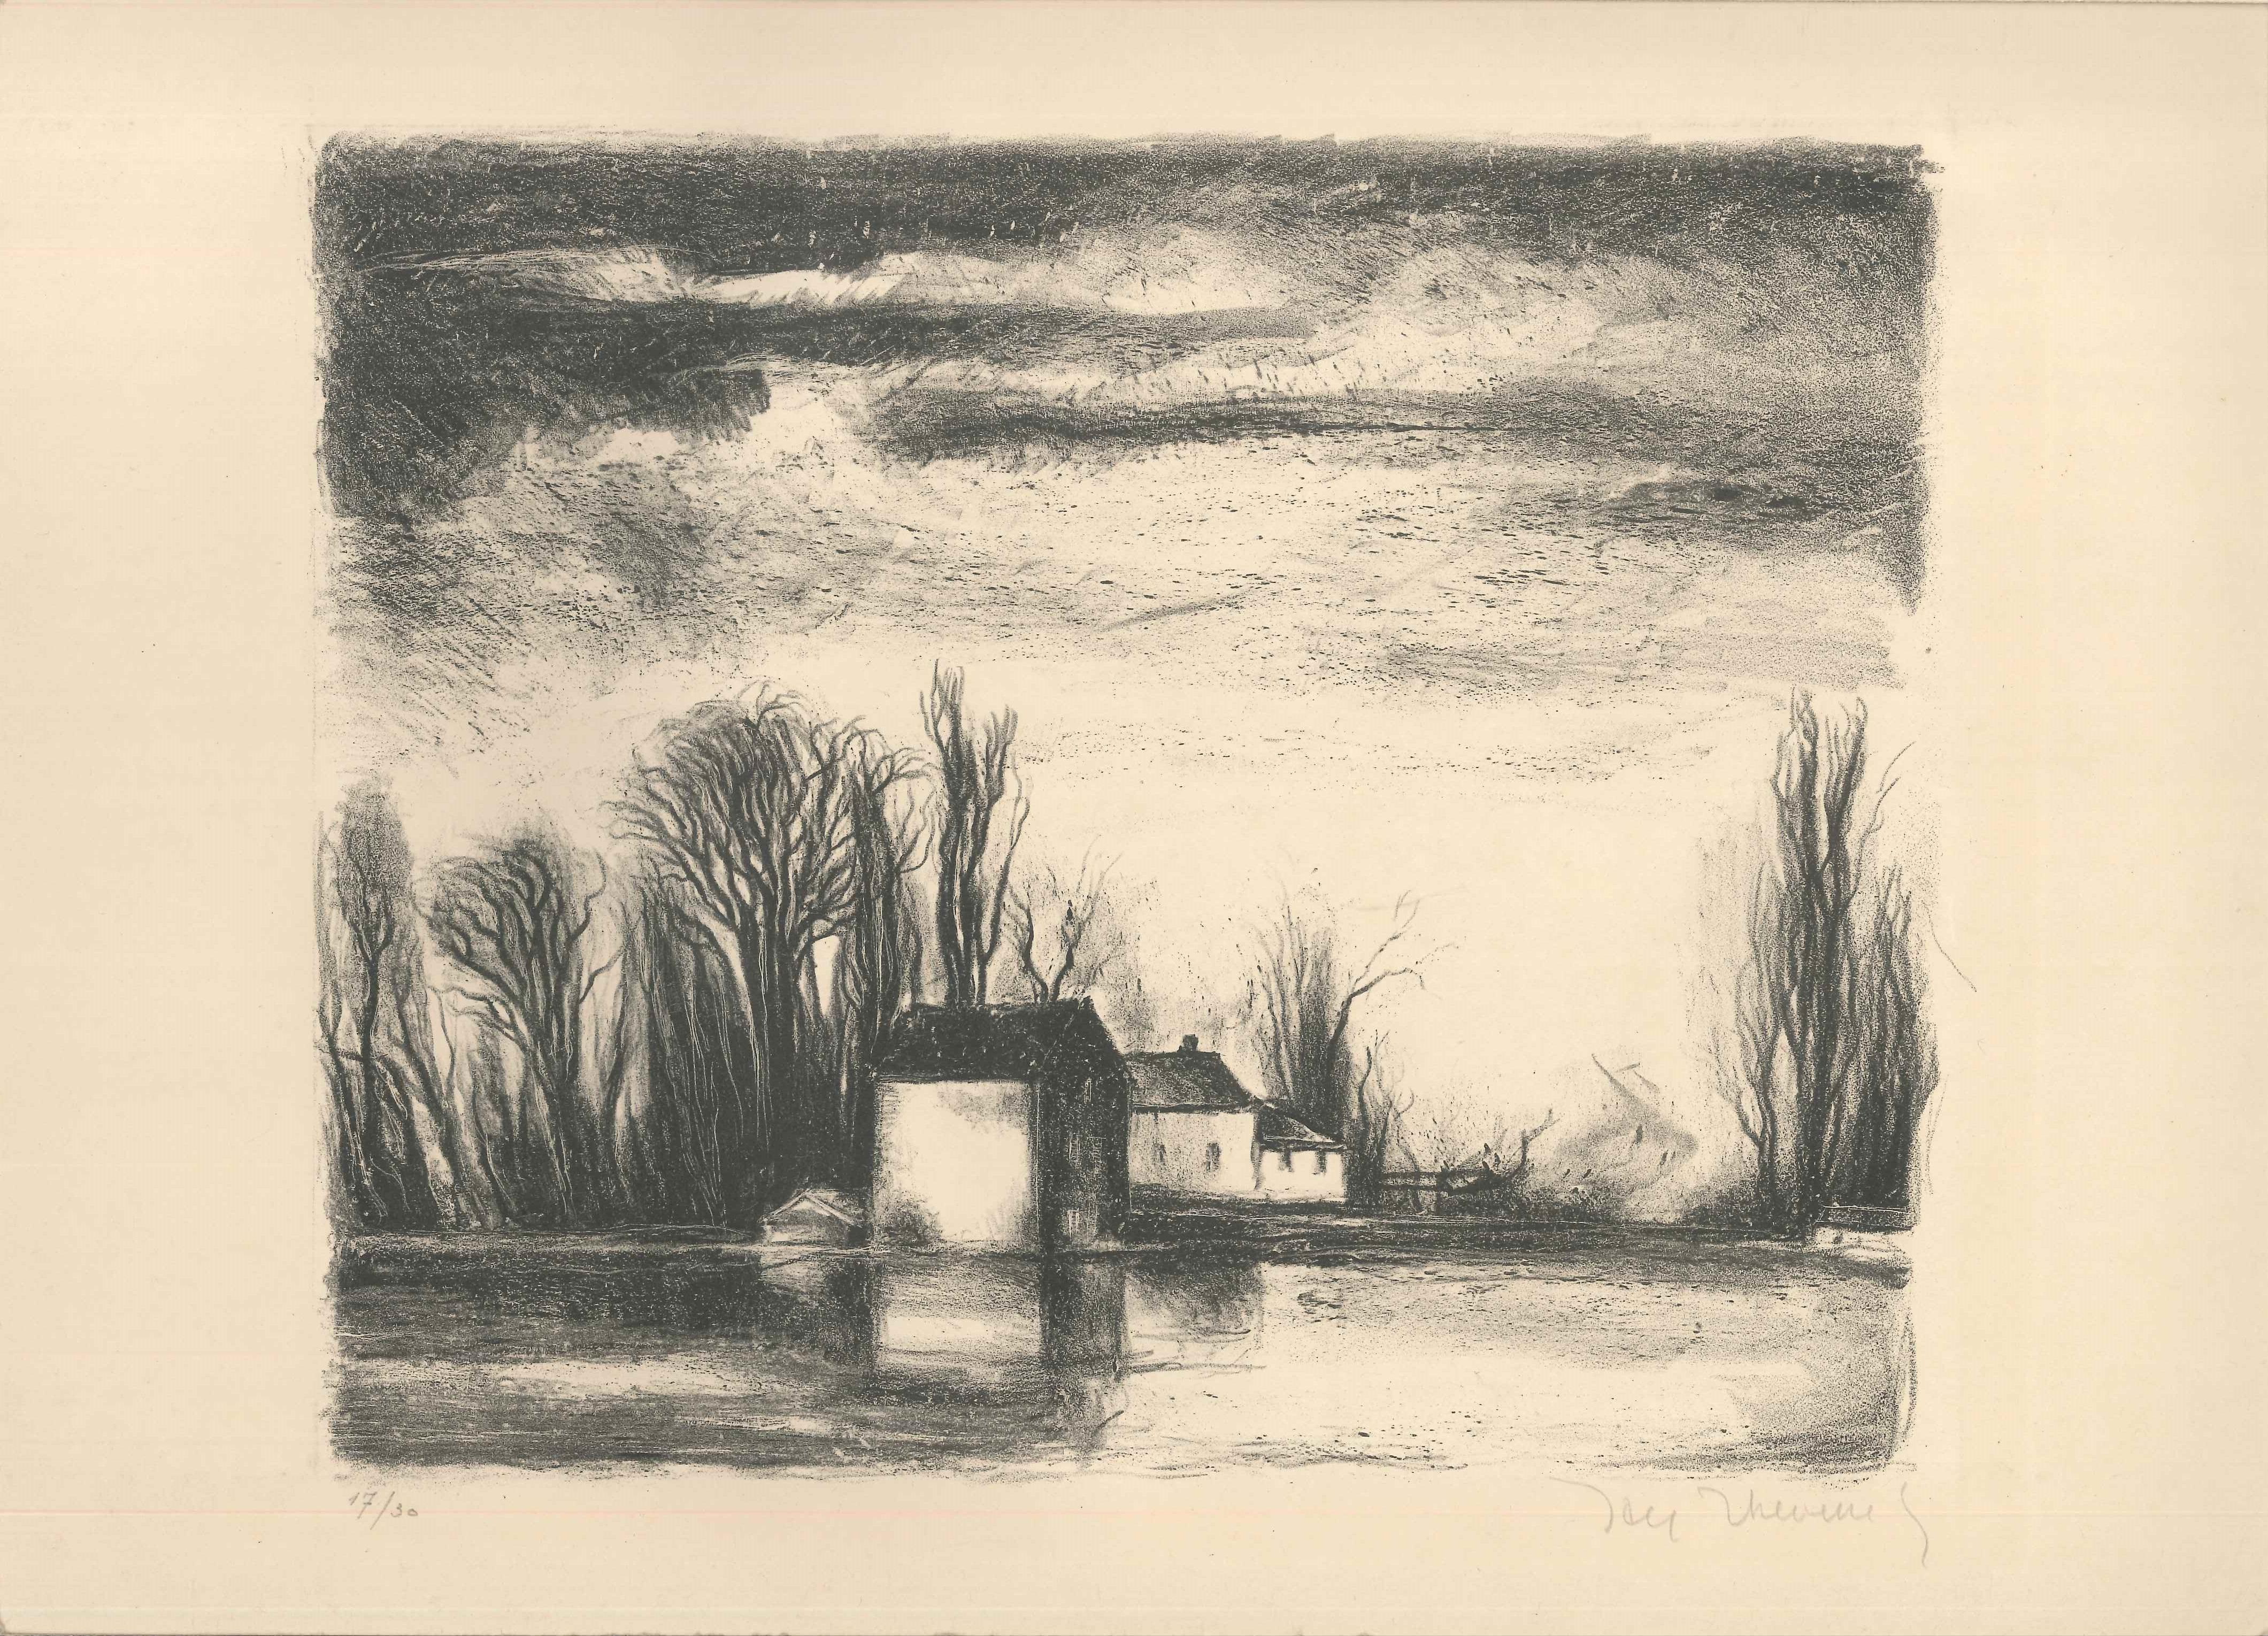 The House on the Water - Original Lithograph by J. Thévenet - 1950s - Print by Jacques Thévenet